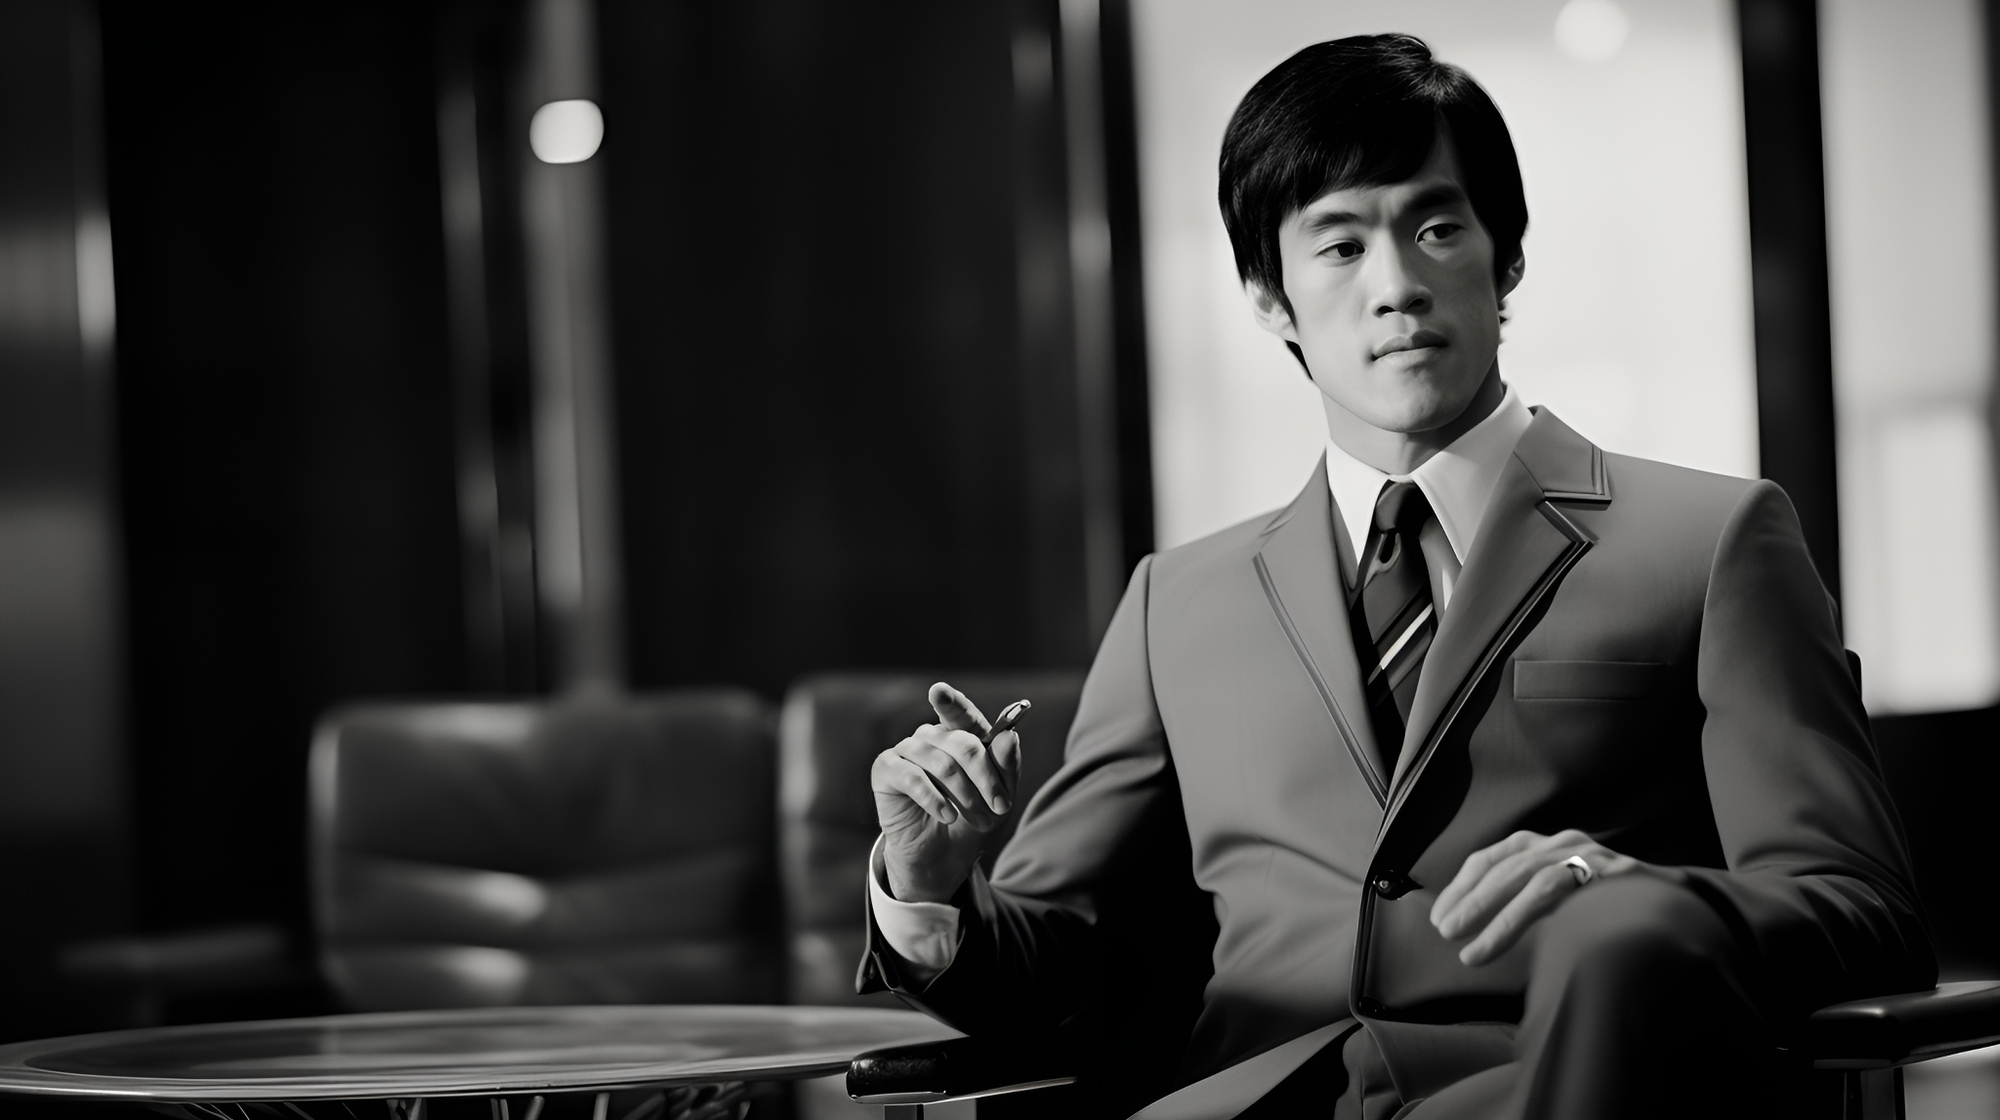 Black and white image of Bruce Lee in a sharp suit, sitting with a contemplative gaze, holding sunglasses, in a stylishly furnished room with soft lighting